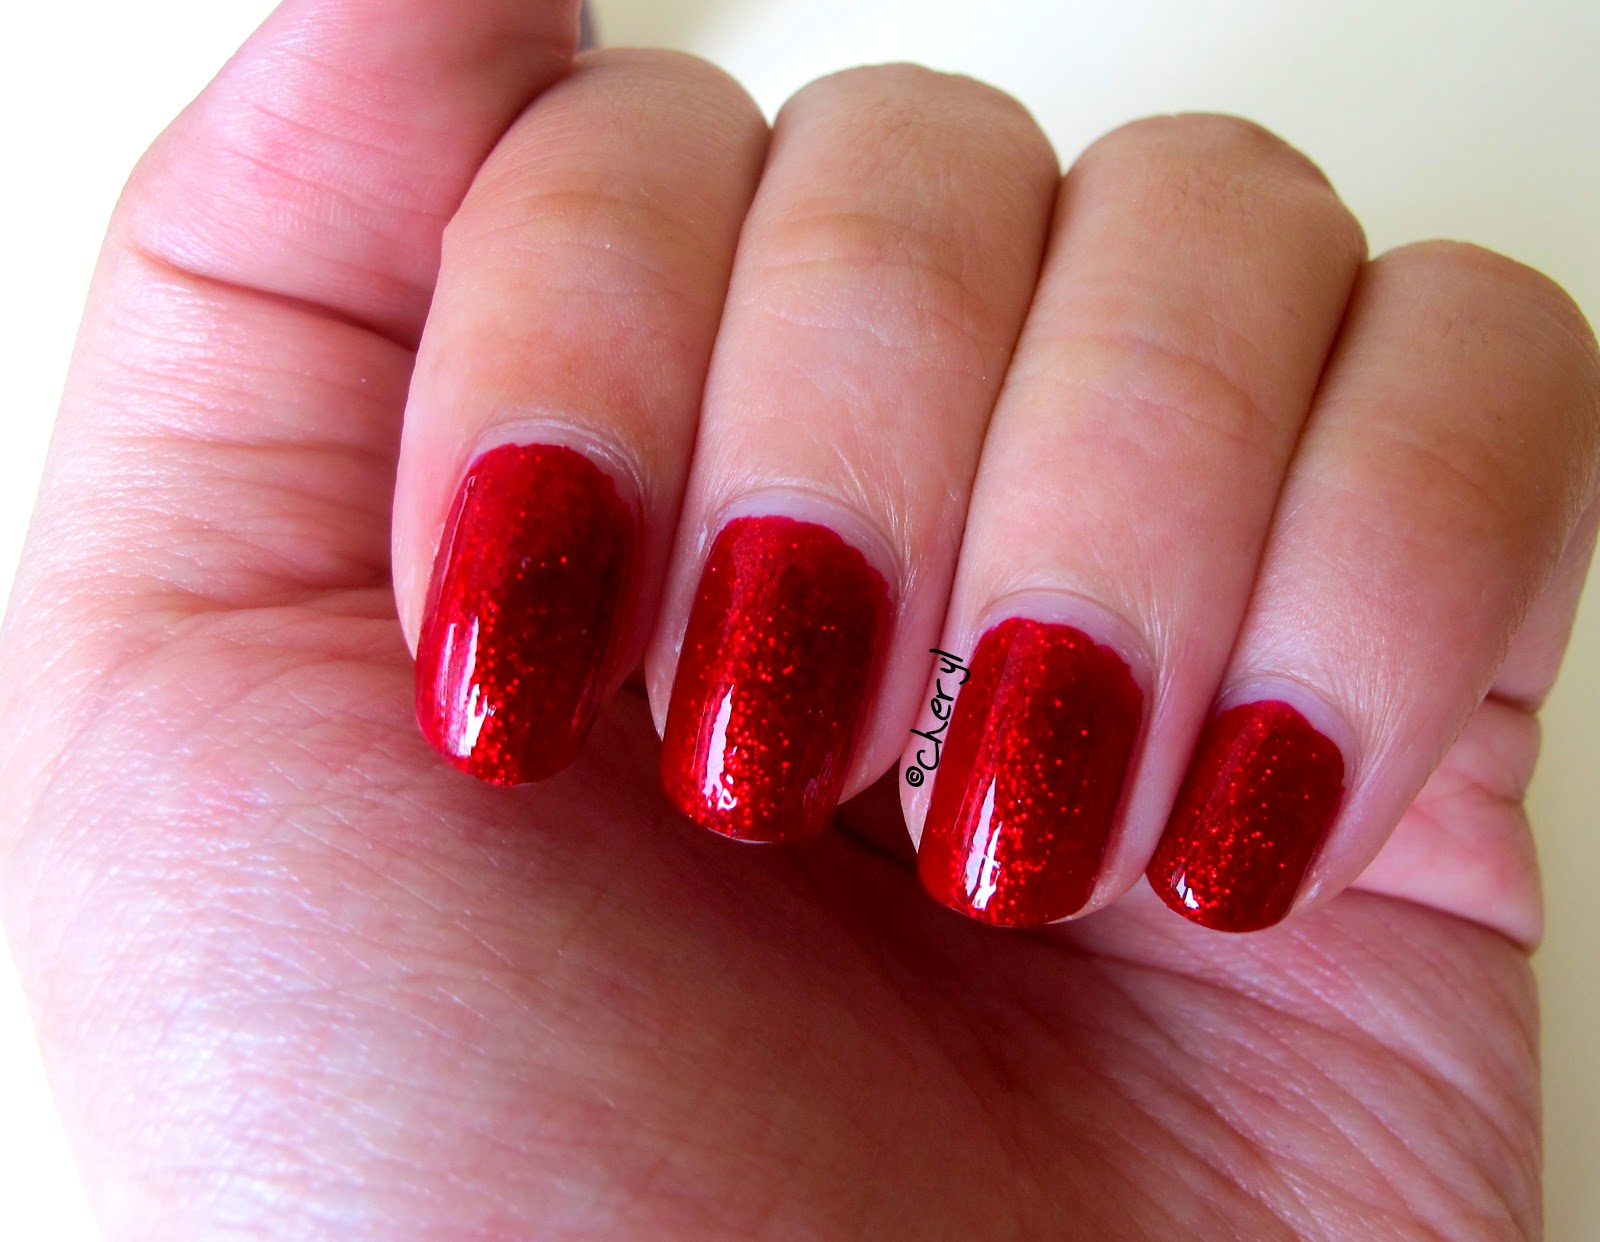 4. China Glaze Nail Lacquer in "Ruby Pumps" - wide 7